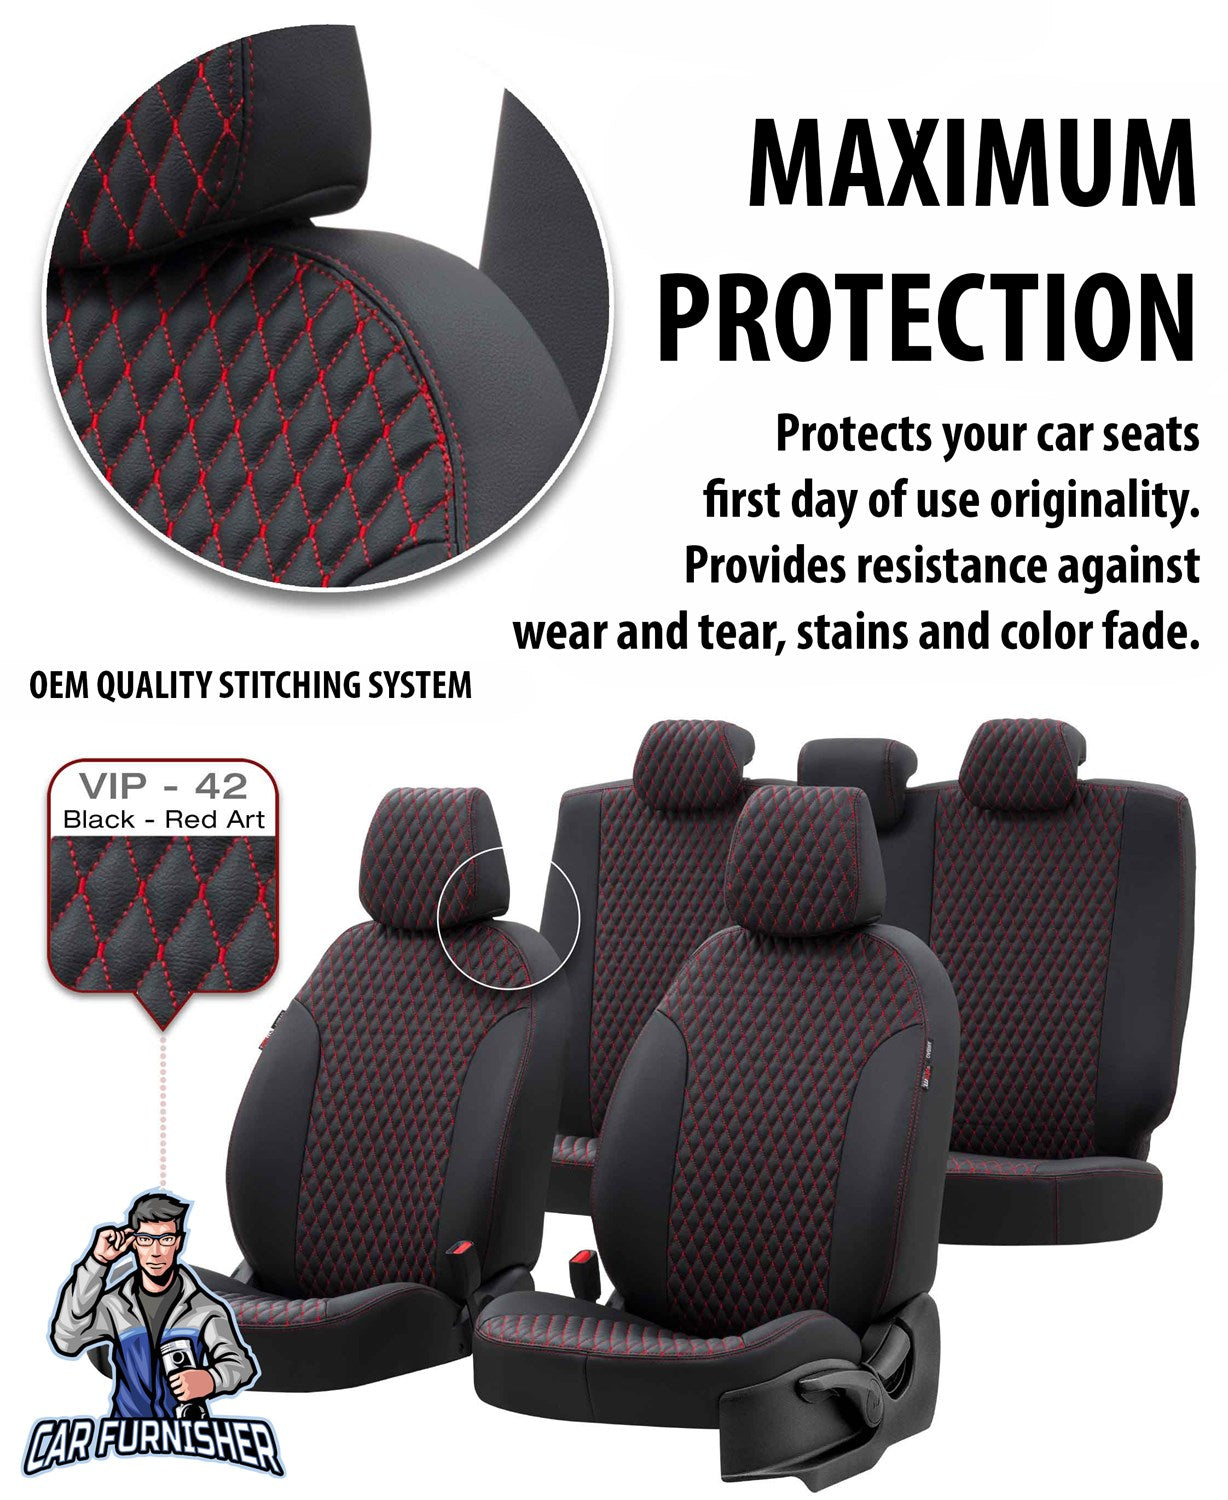 Citroen Jumpy Seat Covers Amsterdam Leather Design Smoked Black Leather